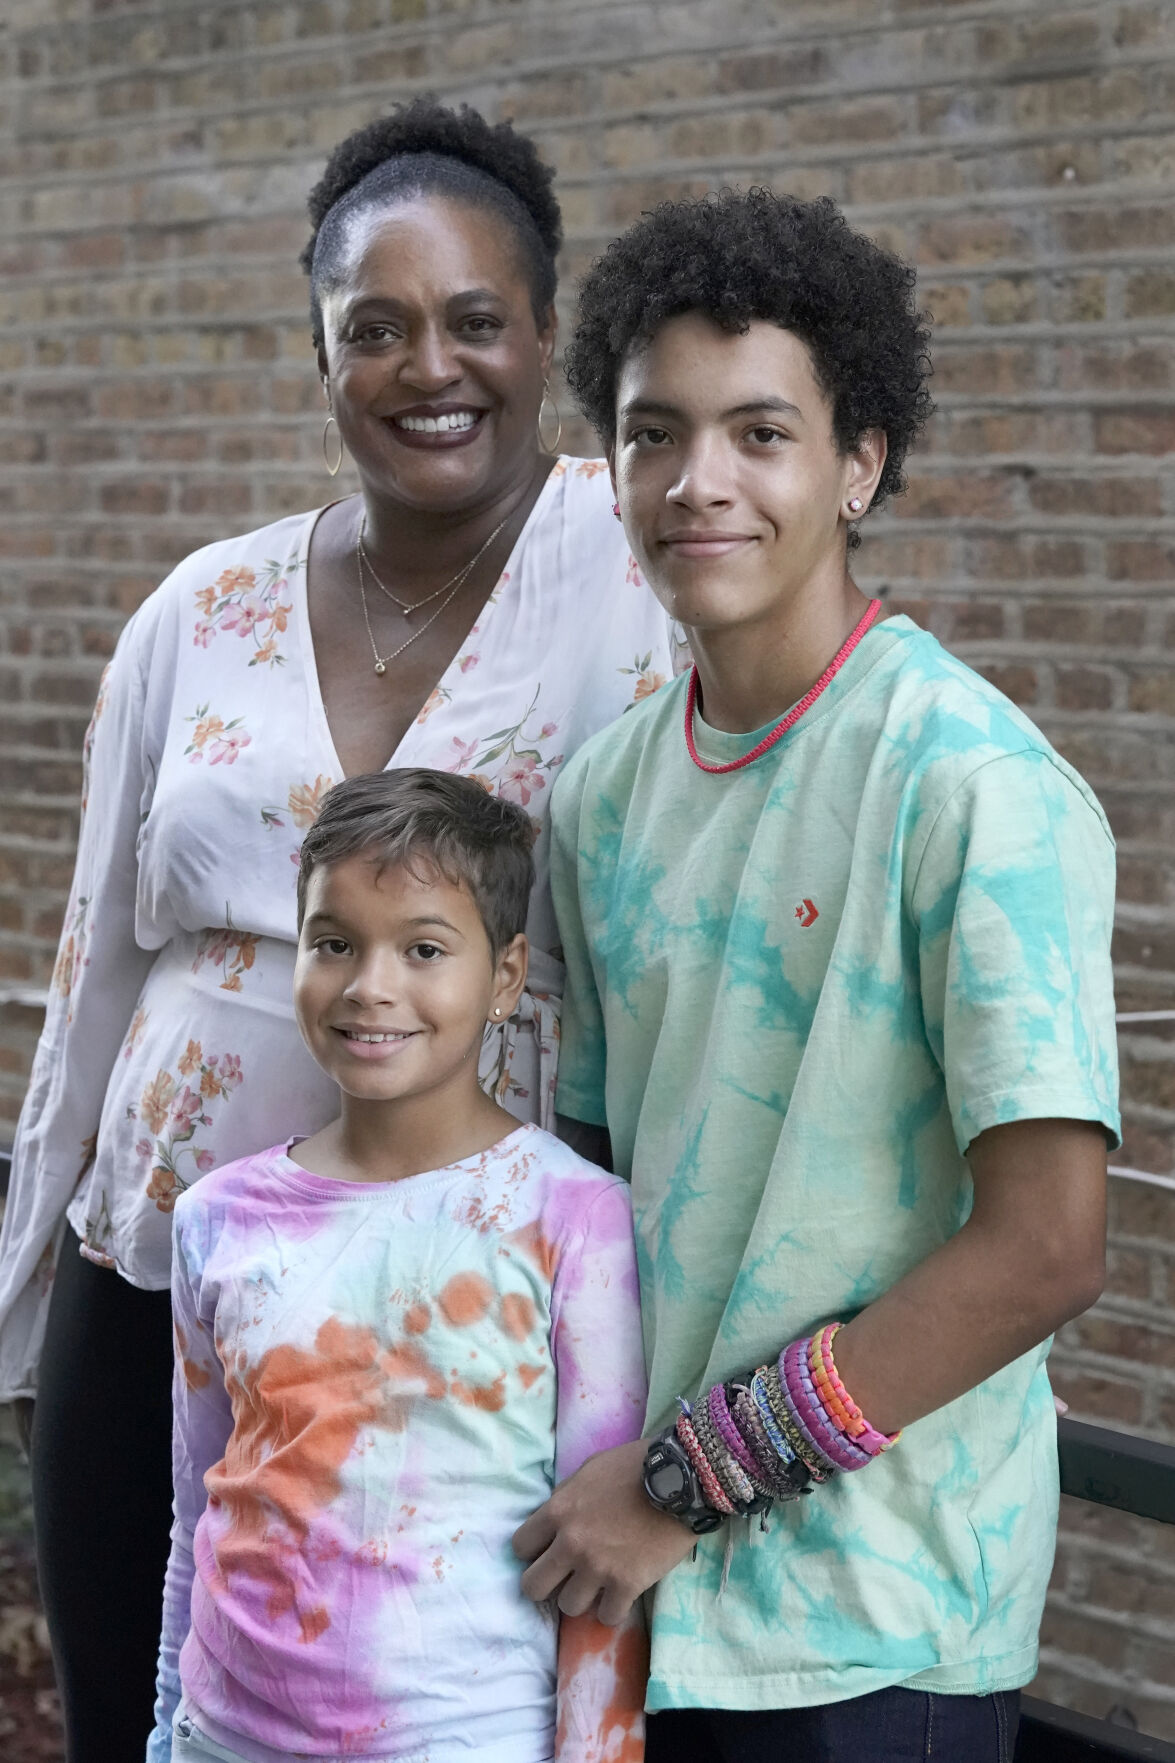 <p>Marla Williams, left, her daughter Mariella Fallon, center, and son Miles Fallon, stand for portrait outside their Chicago home Wednesday, Oct. 12, 2022. Williams initially supported the Chicago Public Schools decision to instruct students online during the fall of 2020. Williams, a single mother, has asthma, as do her two children. While she was working, she enlisted her father, a retired teacher, to supervise her children’s studies. (AP Photo/Charles Rex Arbogast)</p>   PHOTO CREDIT: Charles Rex Arbogast - staff, AP